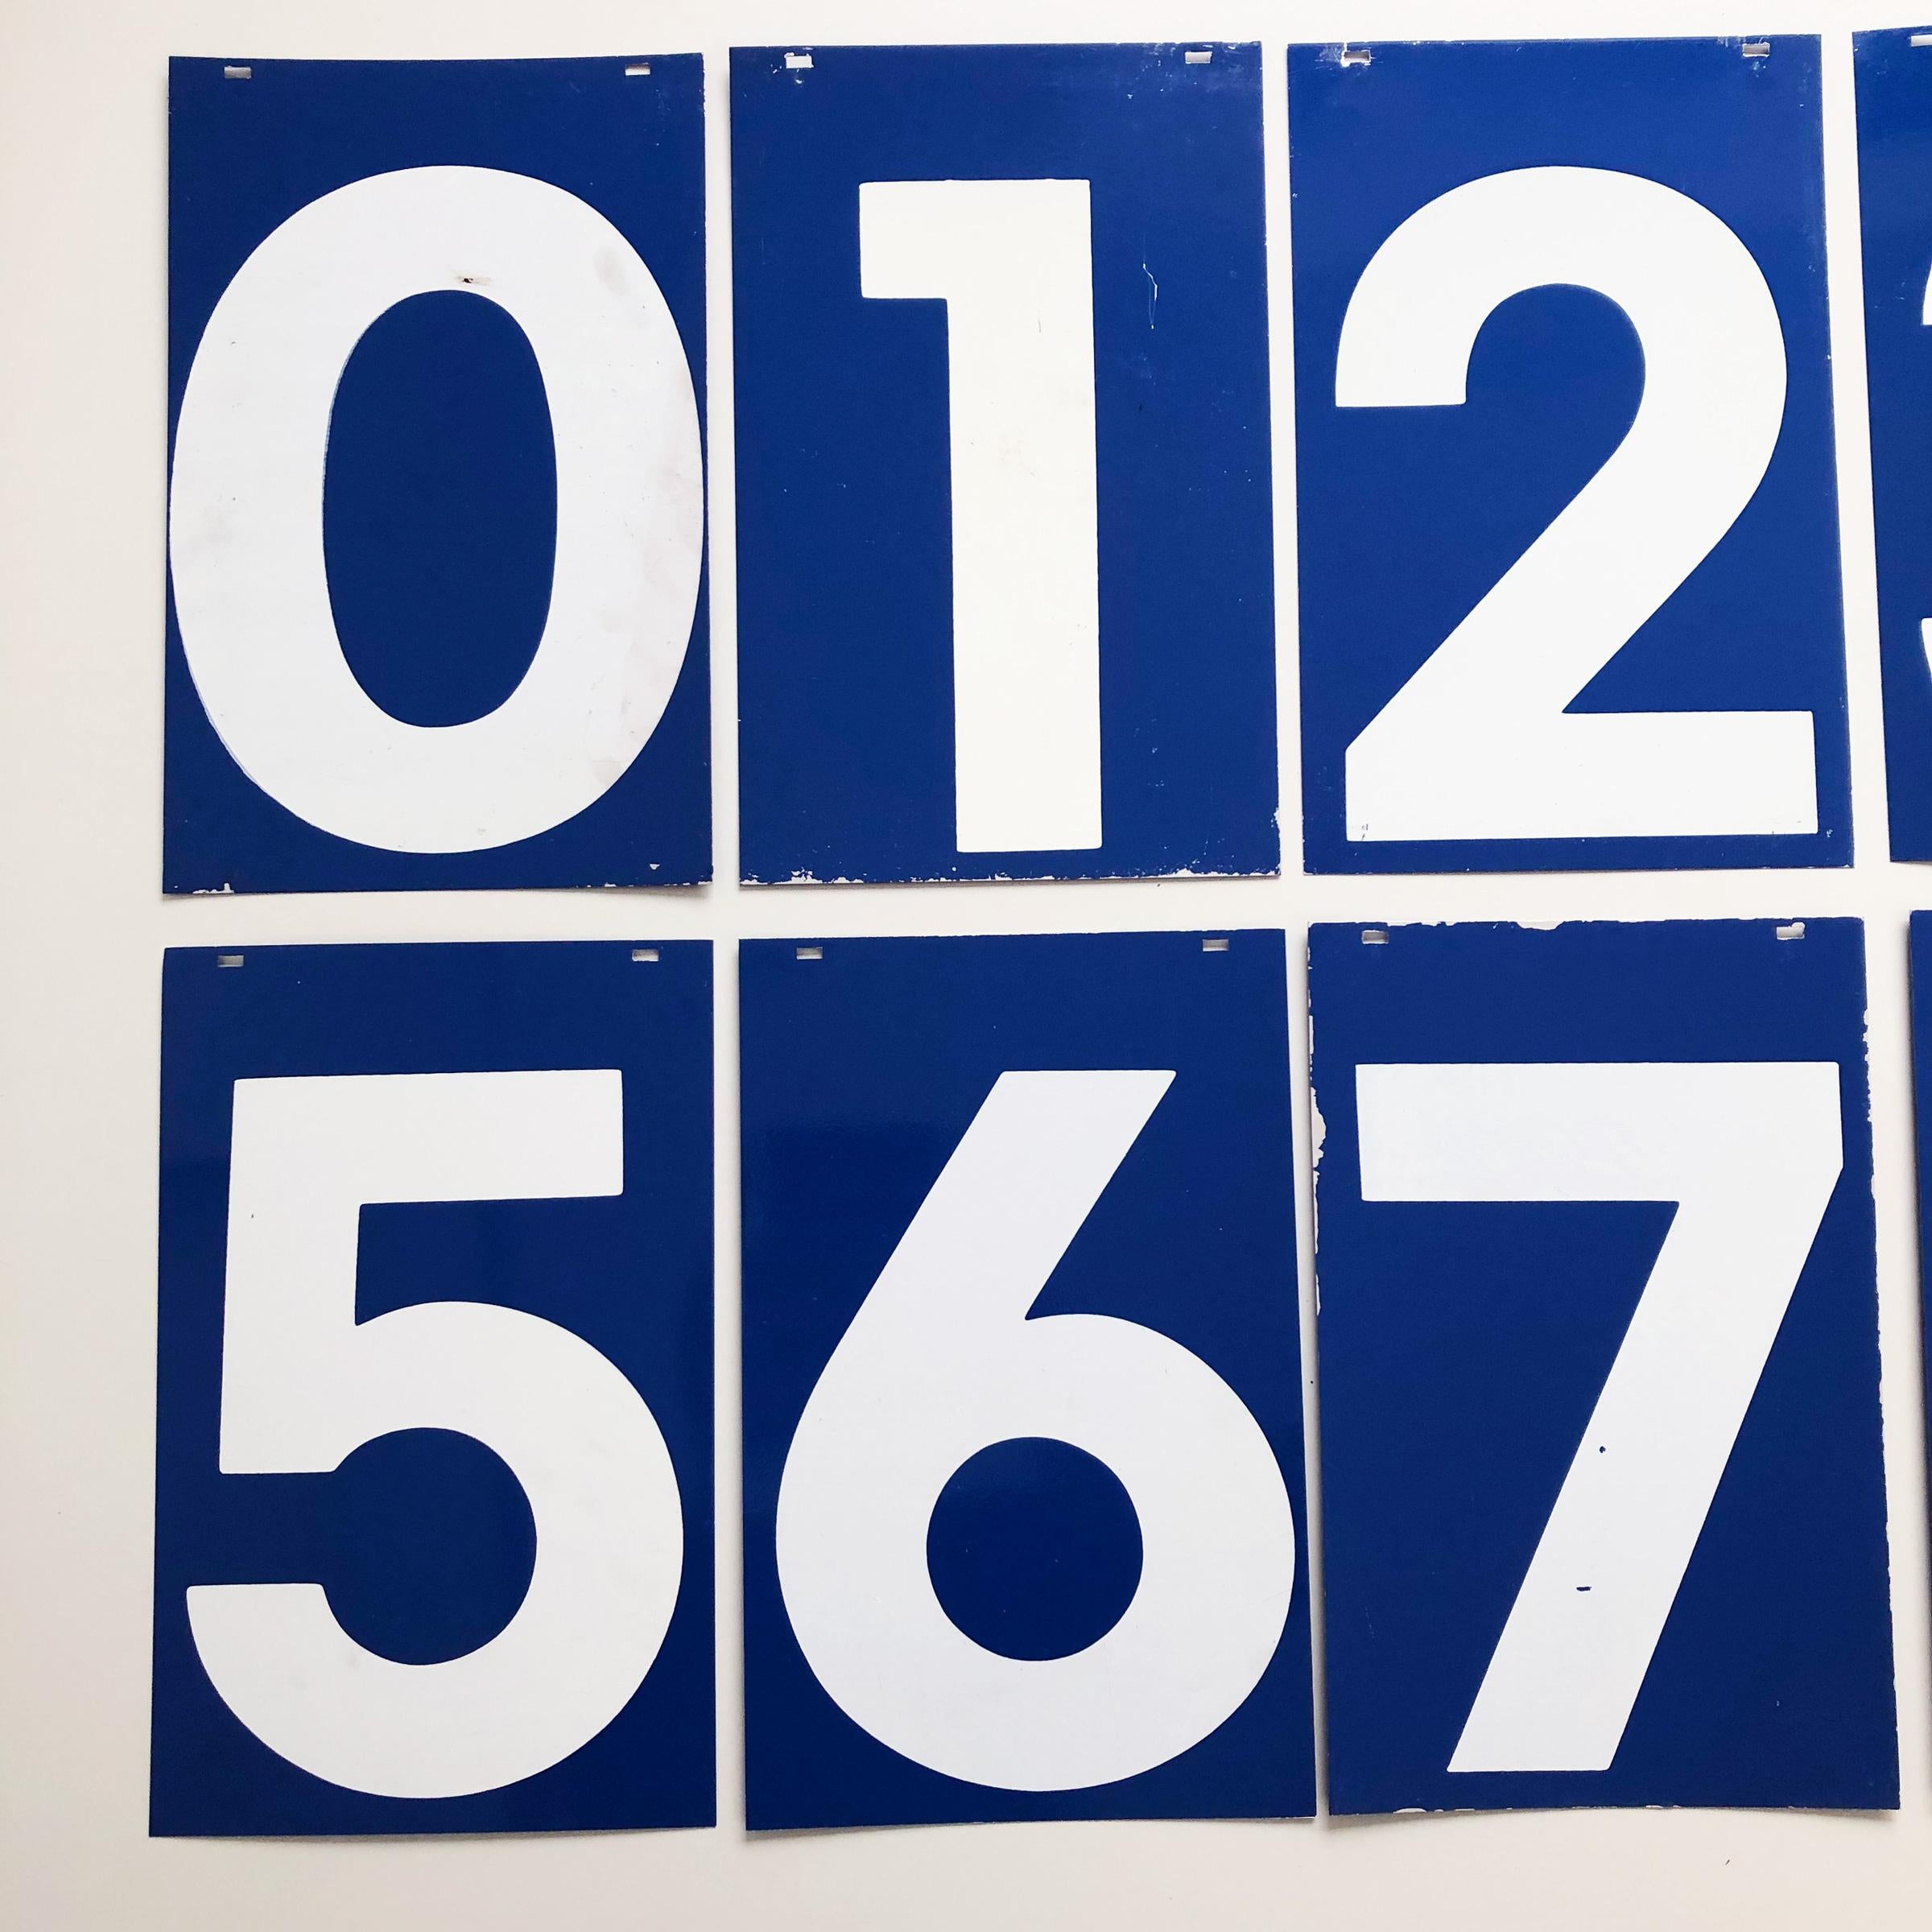 Vintage metal blue and white reclaimed gas station number sign from Vermont, USA.
 
Measures: Height 15 inches, width 9.5 inches (approximate).
Price is for one set of double sided numbers, 10 number signs
Other numbers available.
Fantastic